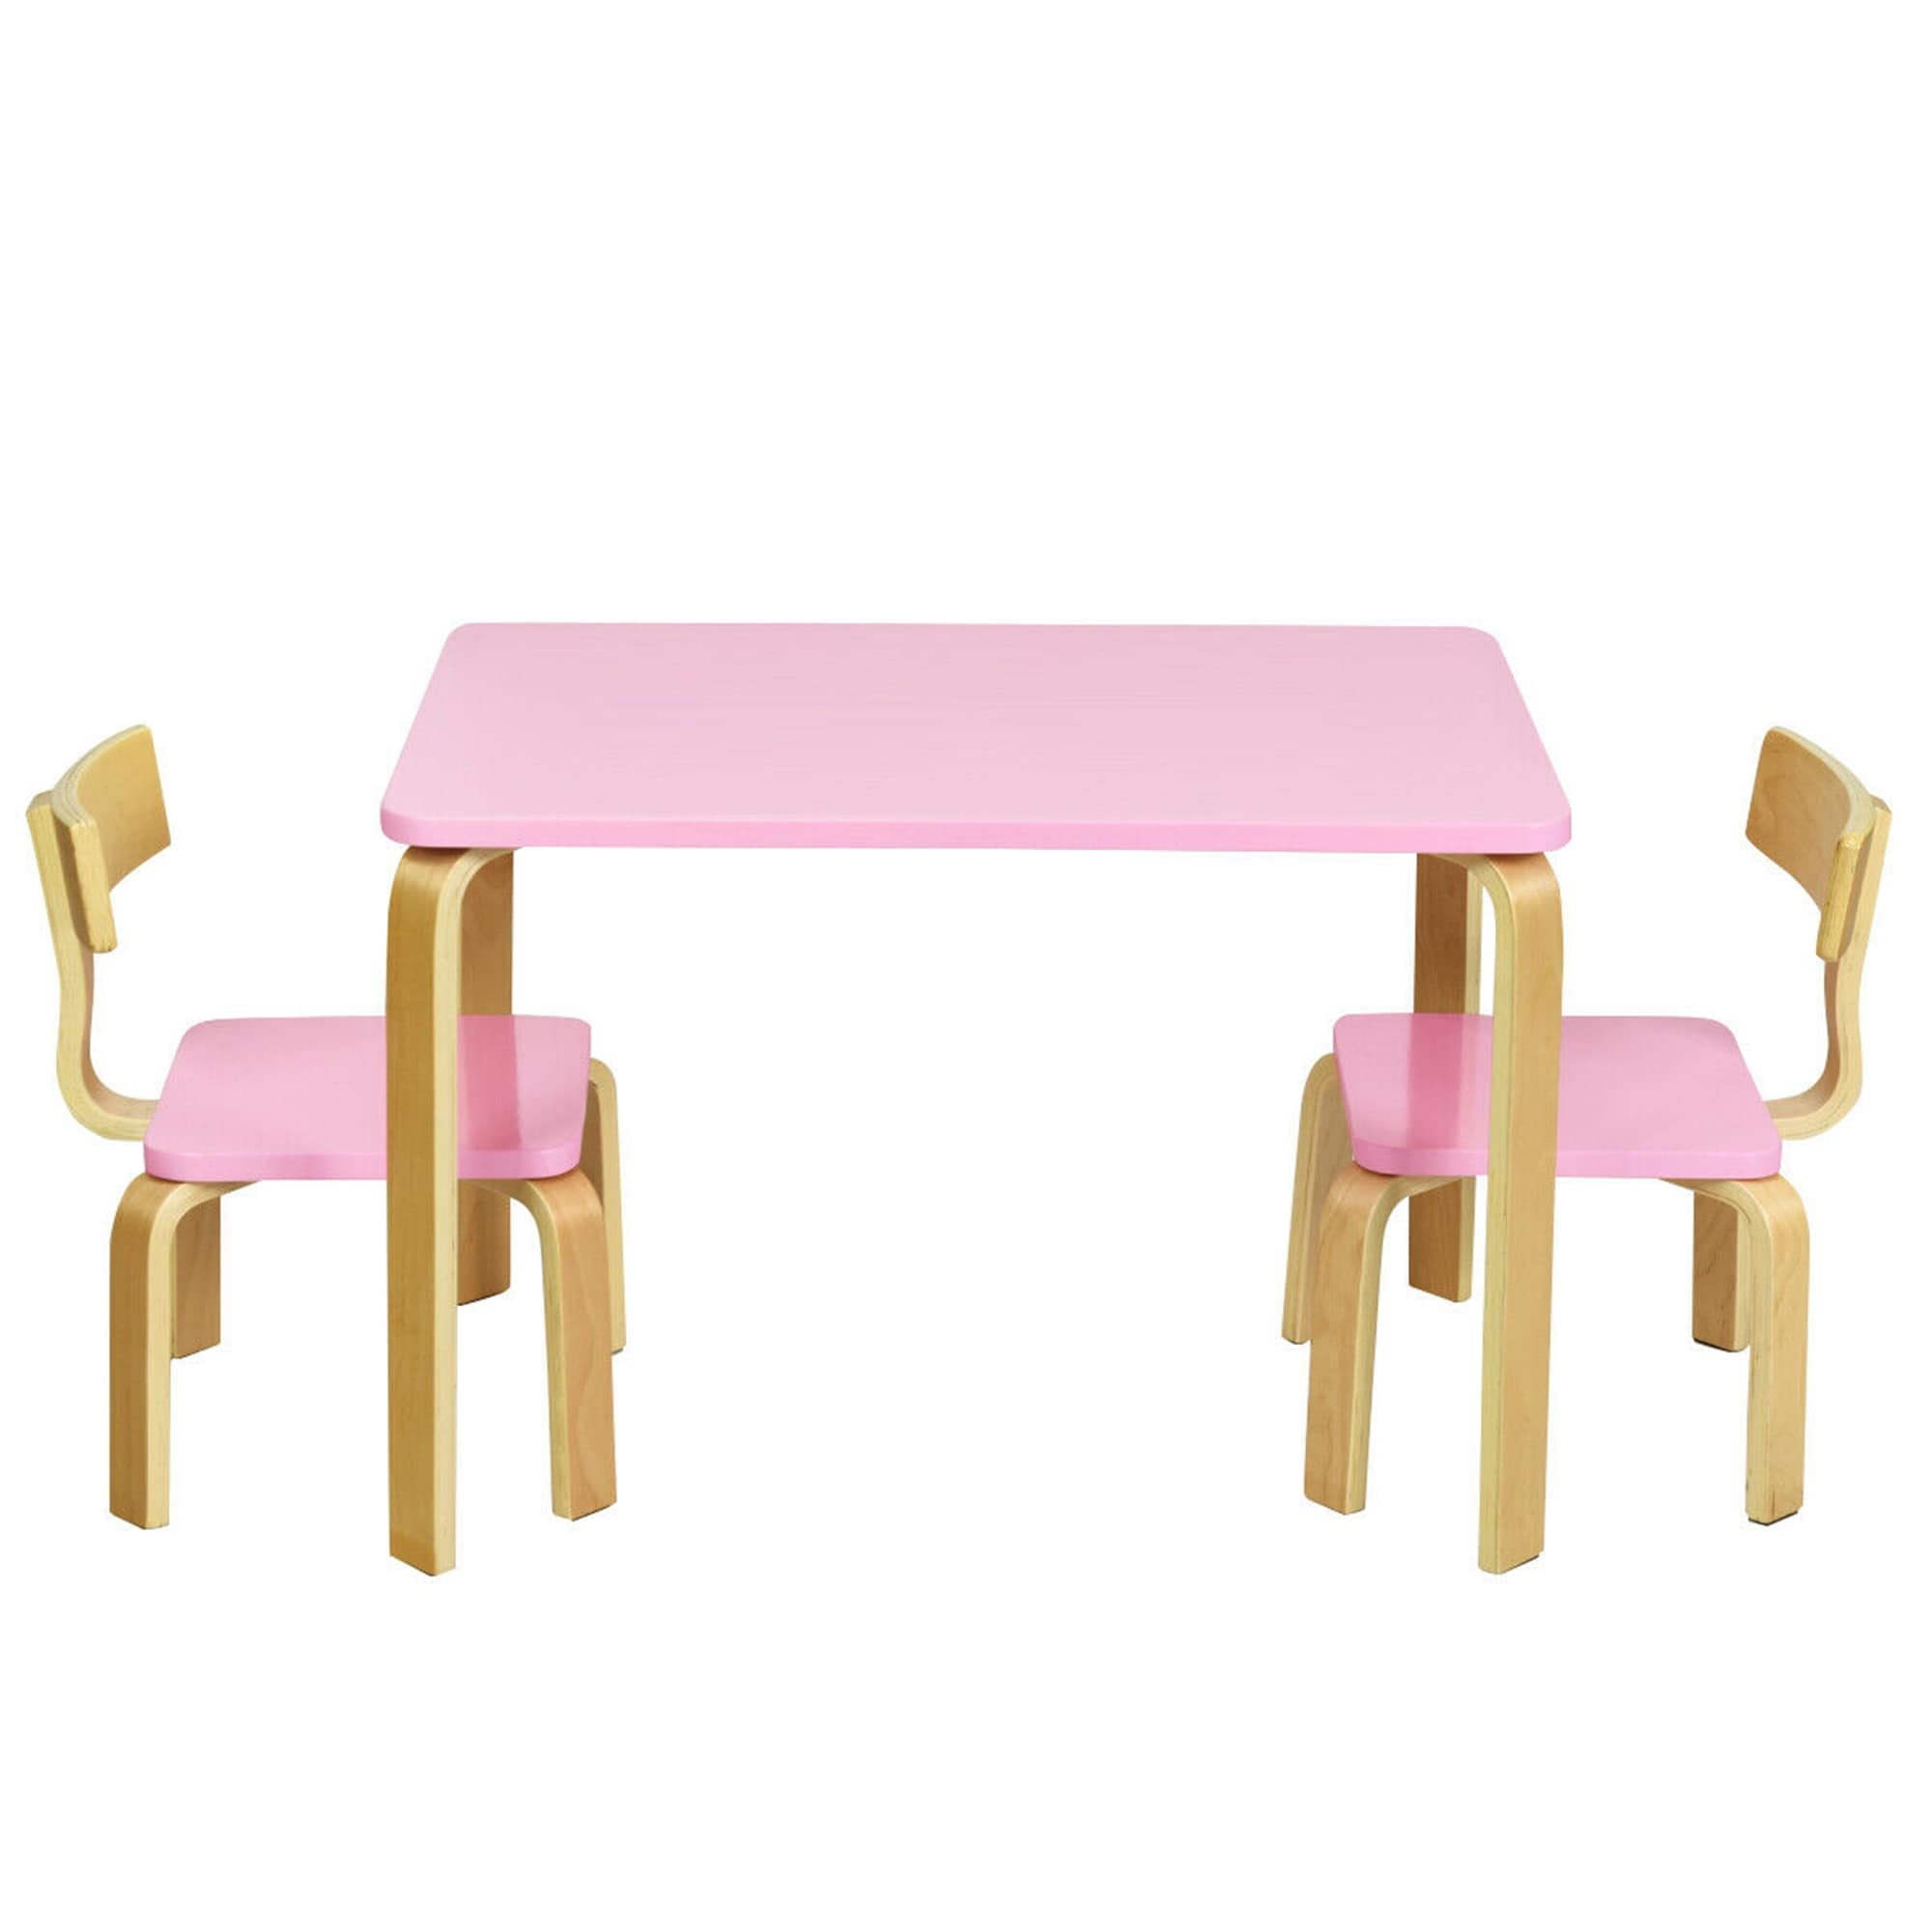 https://ak1.ostkcdn.com/images/products/is/images/direct/bc94289423a93253e167b3a522941f1ccec429a2/Gymax-3-Piece-Kids-Wooden-Table-and-2-Chairs-Set-Children-Activity-Art.jpg